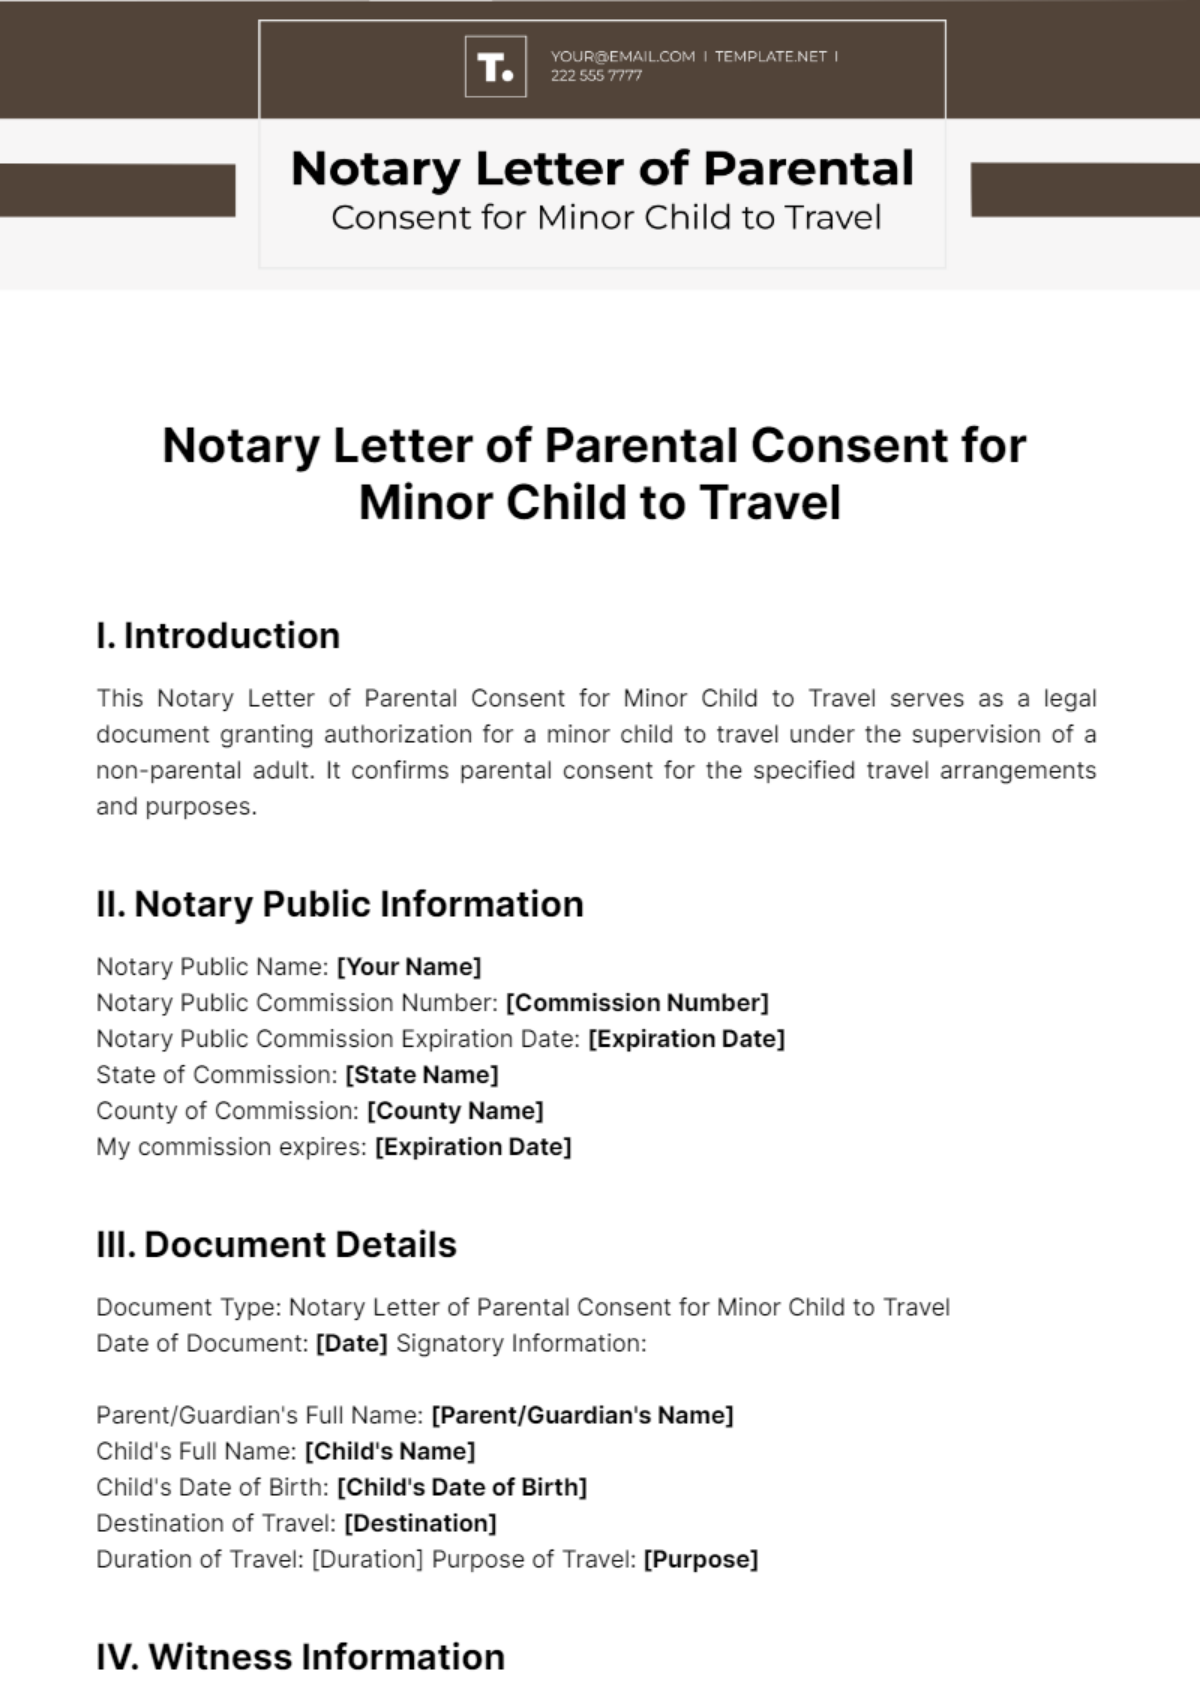 Notary Letter of Parental Consent for Minor Child to Travel Template